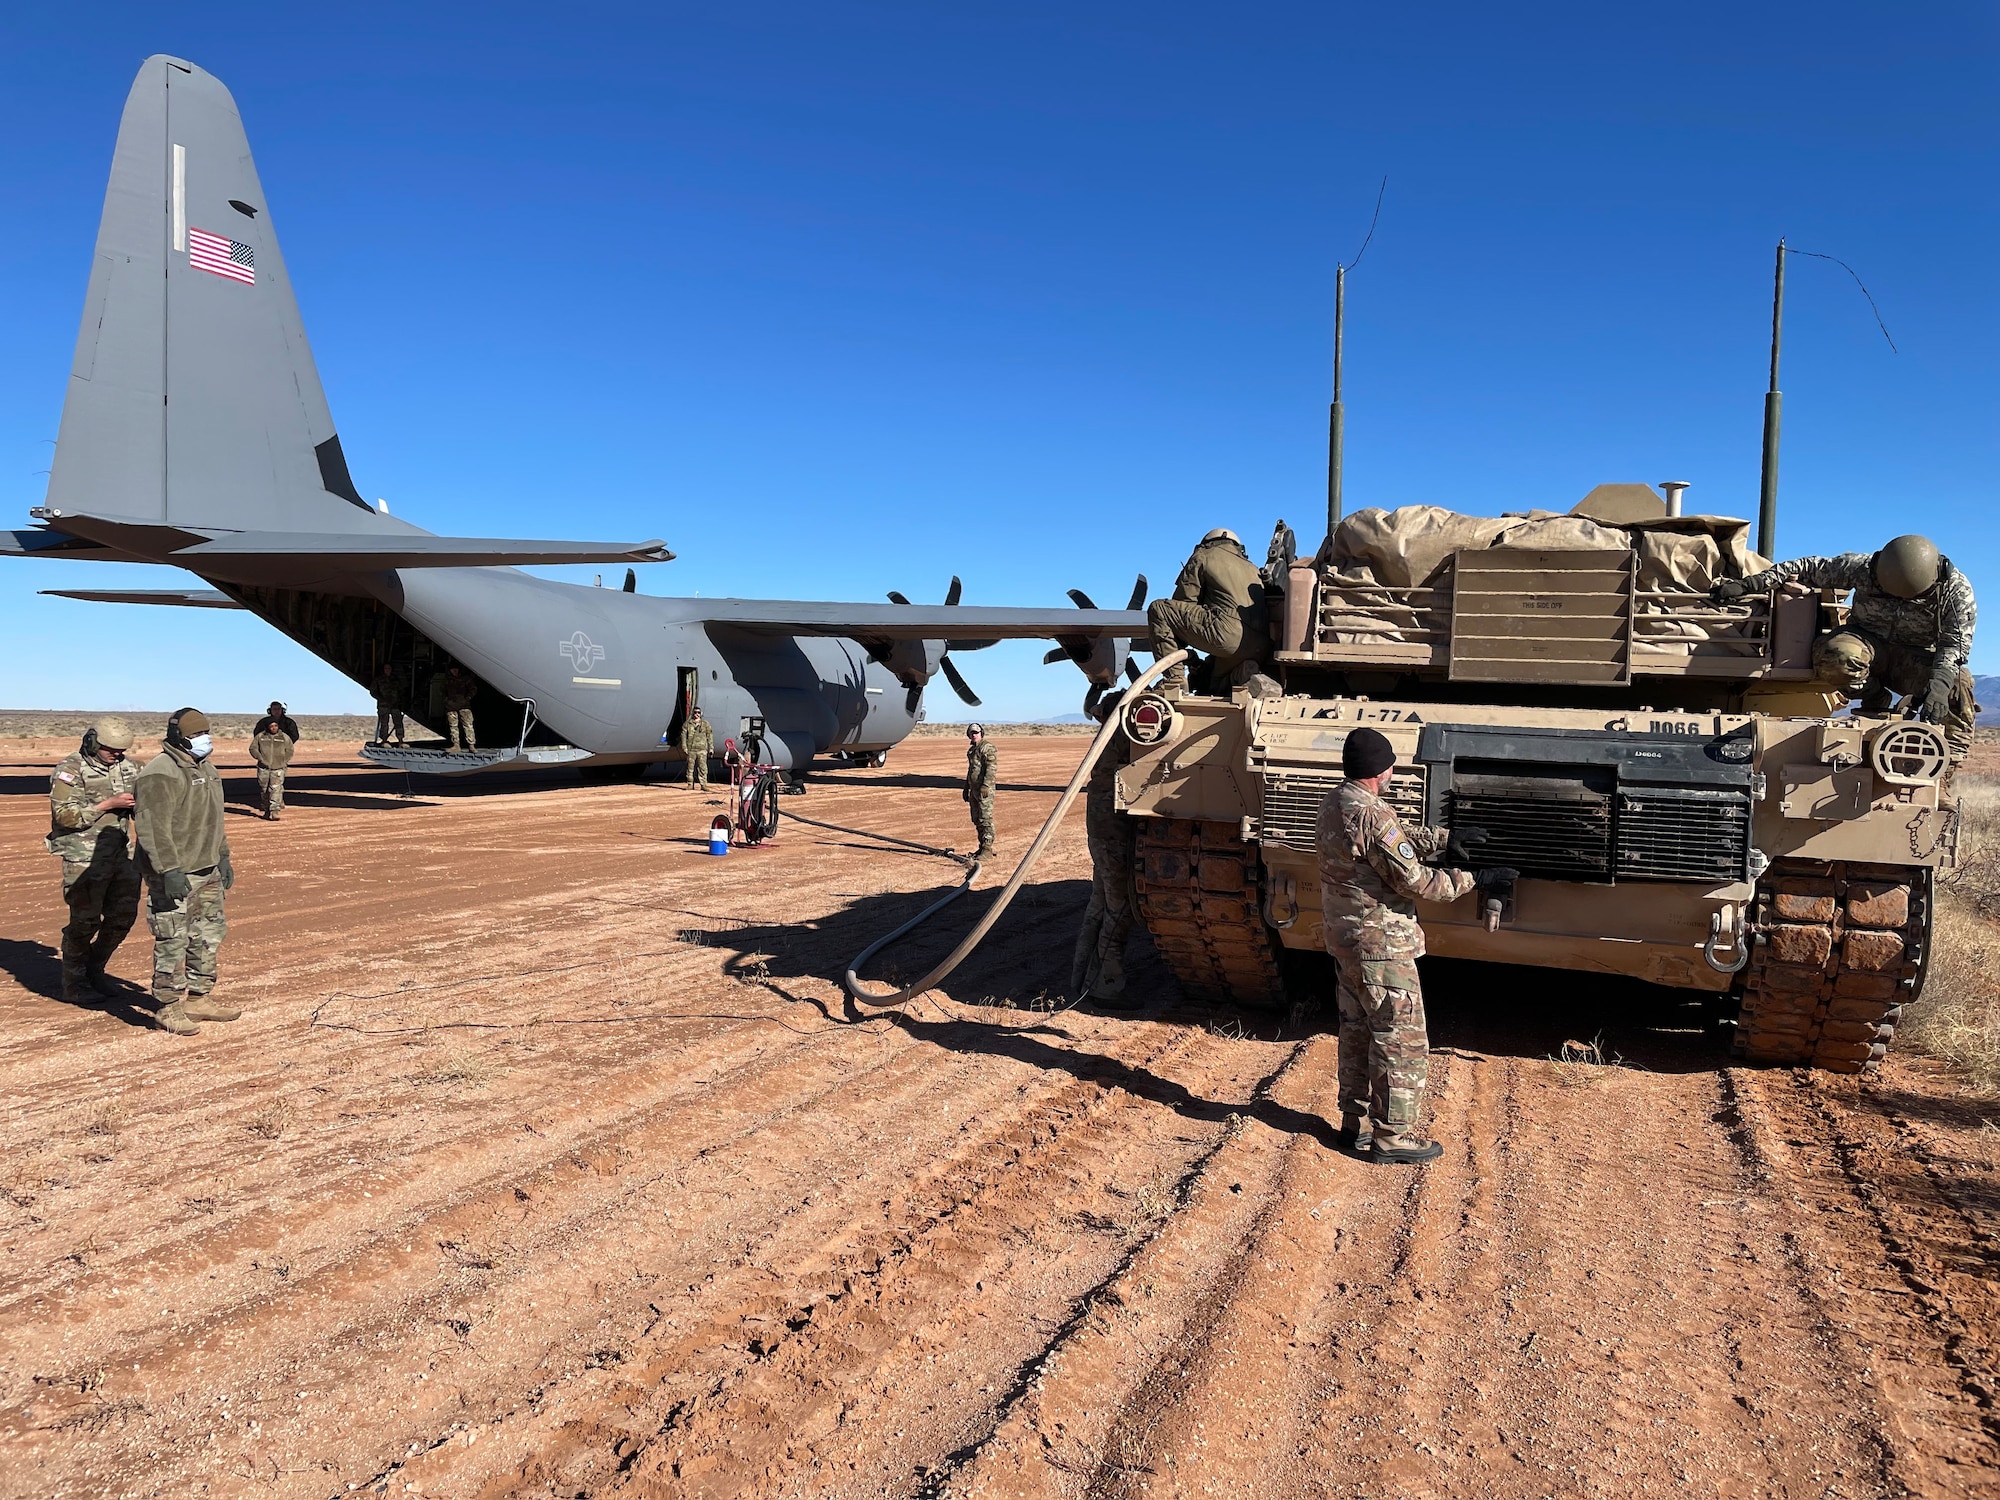 317th Aw Refuel M1a2 Tank From C 130j A First In Air Force History 18th Air Force Article